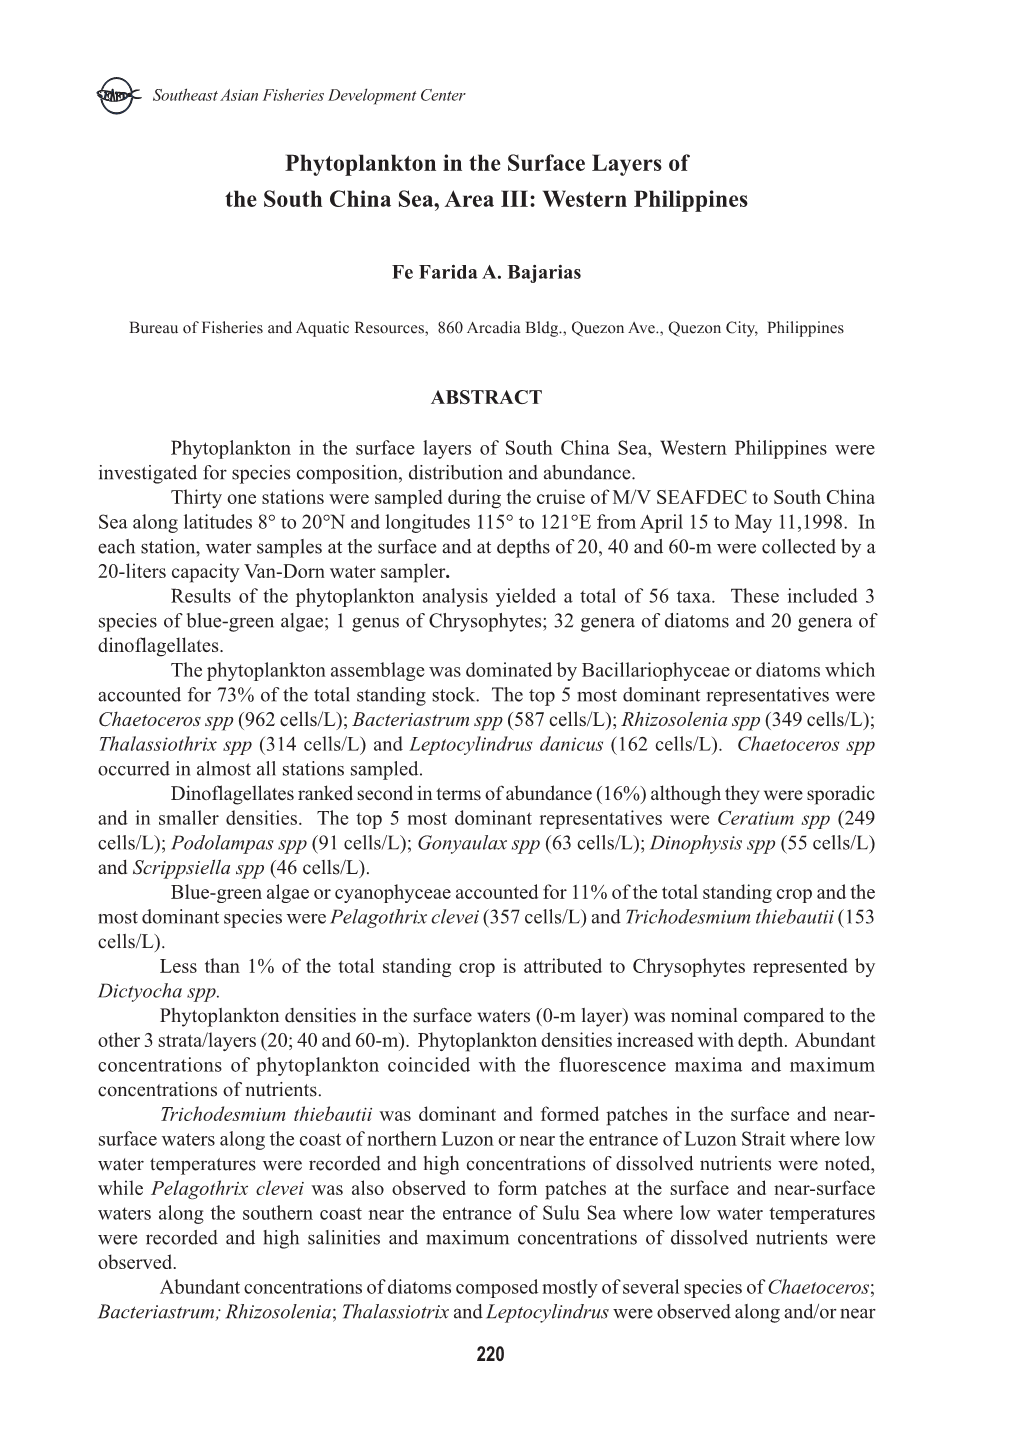 Phytoplankton in the Surface Layers of the South China Sea, Area III: Western Philippines